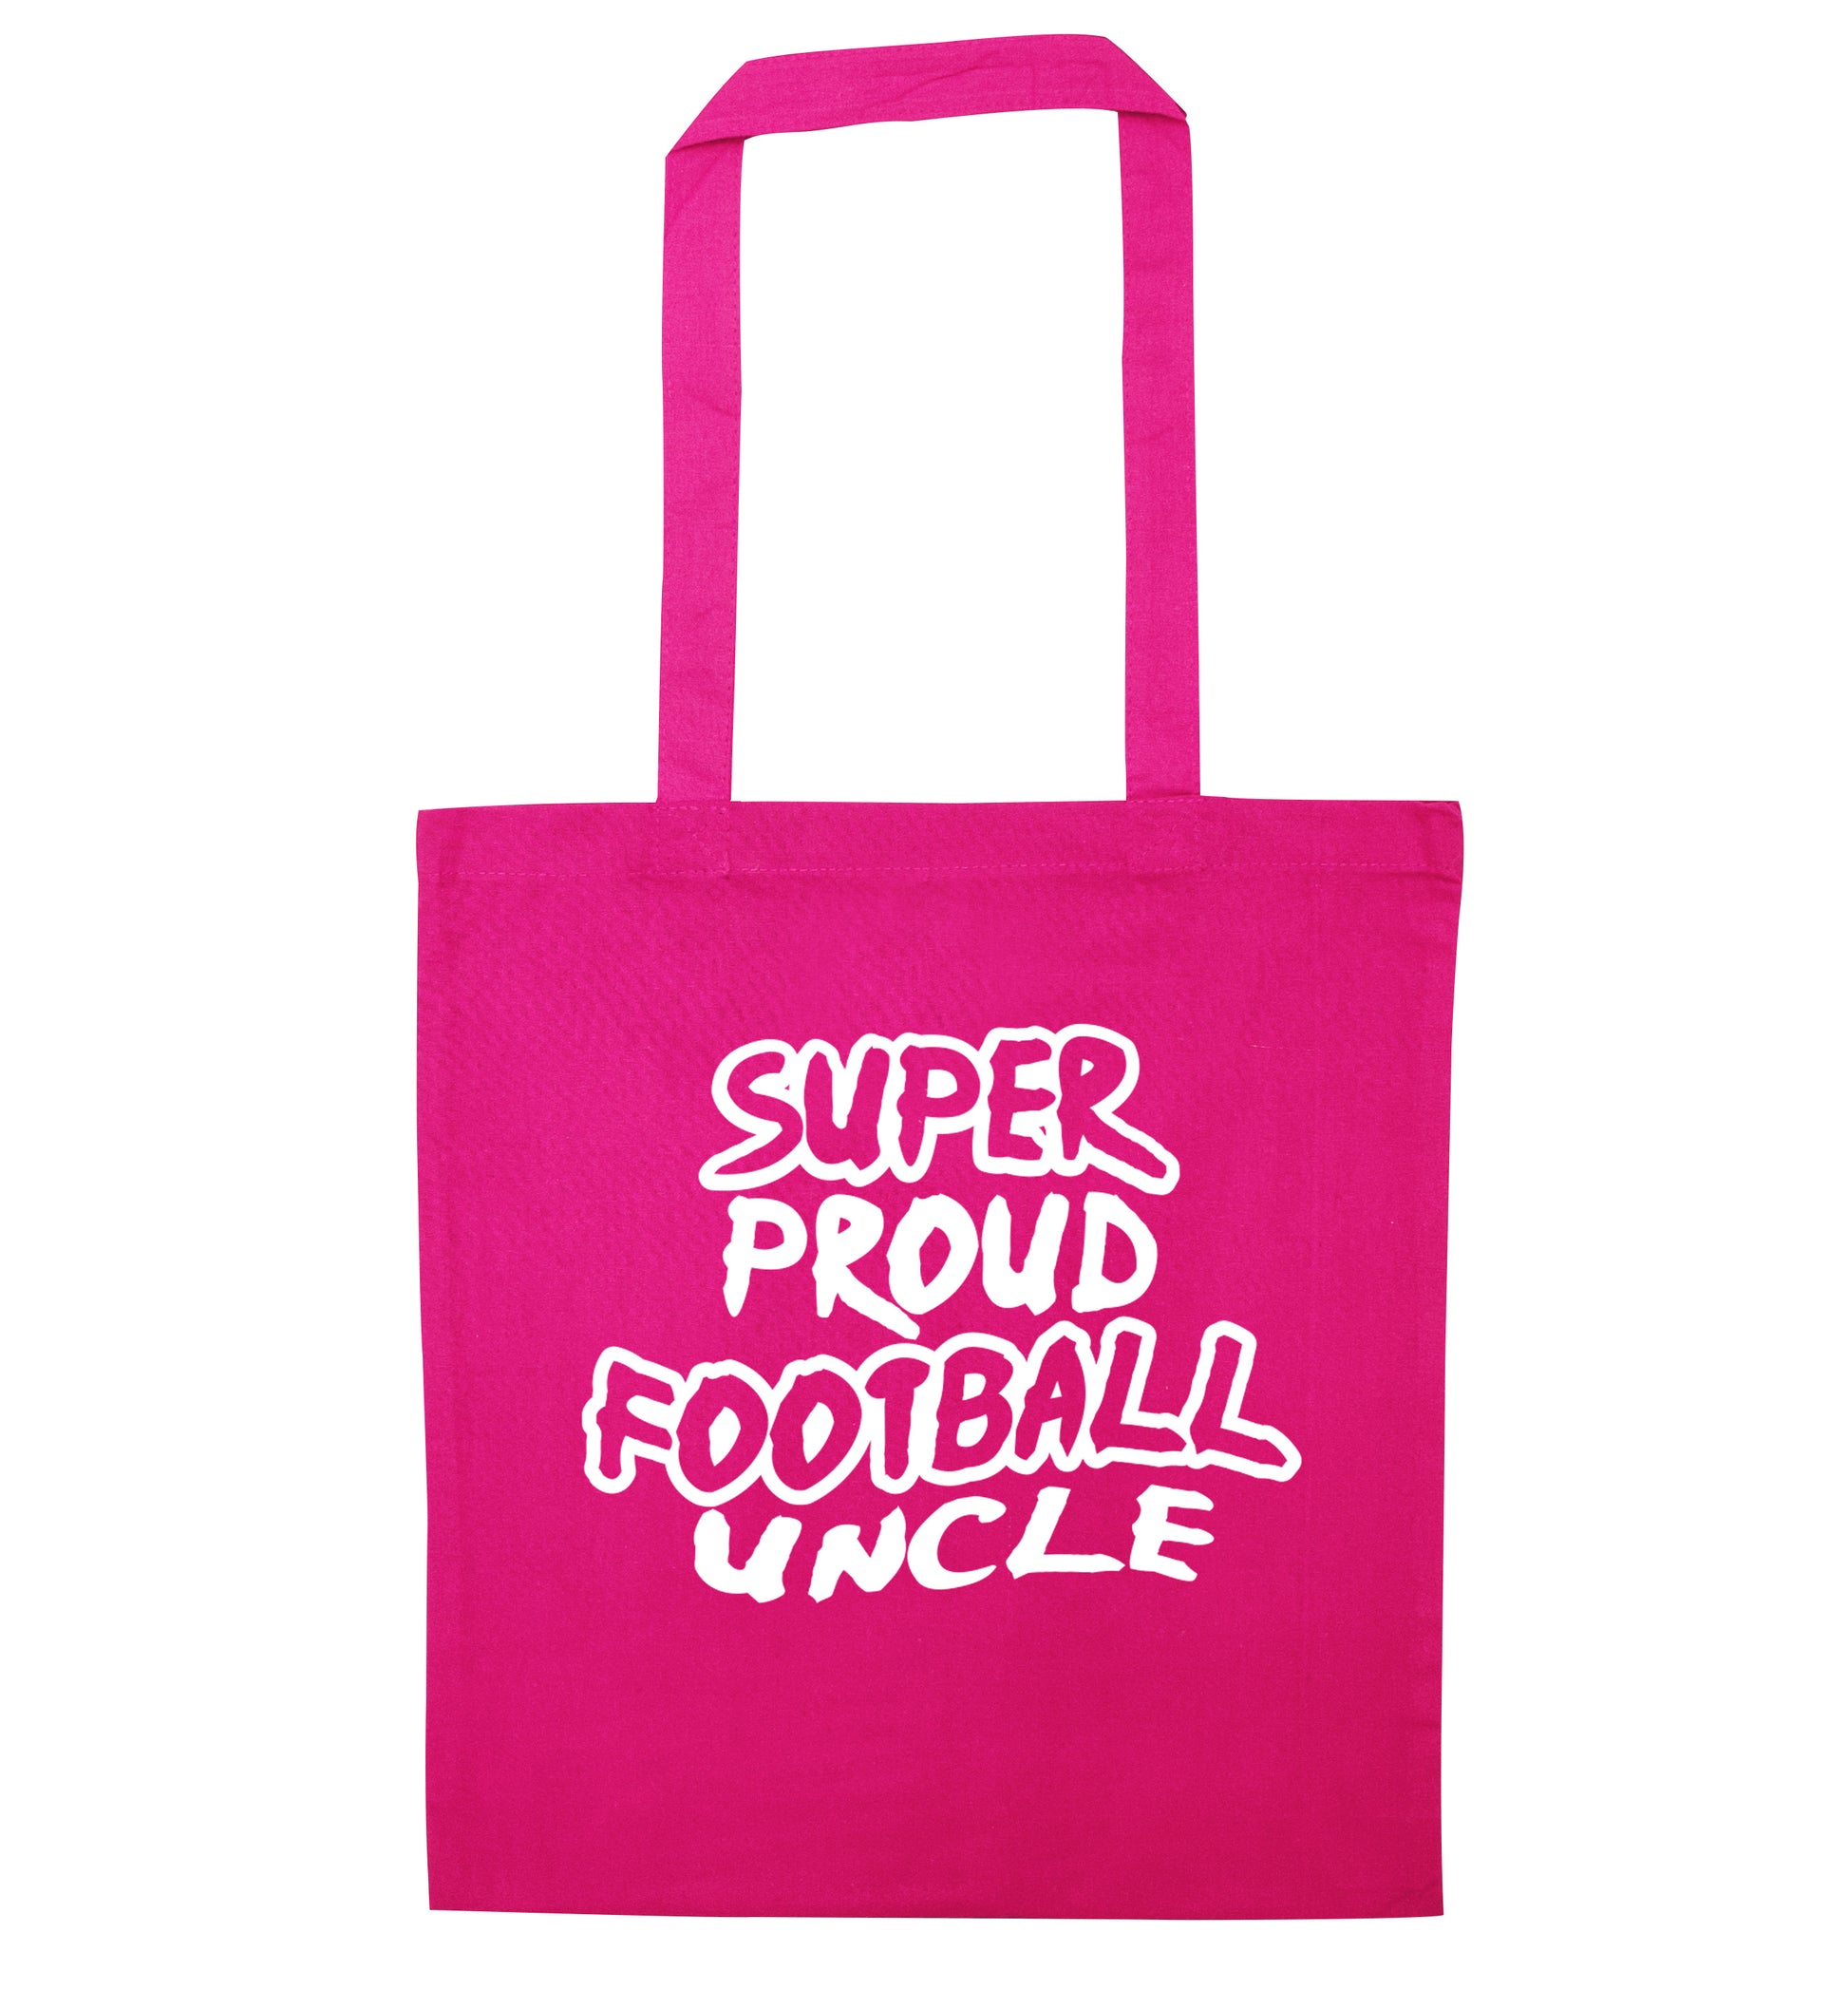 Super proud football uncle pink tote bag